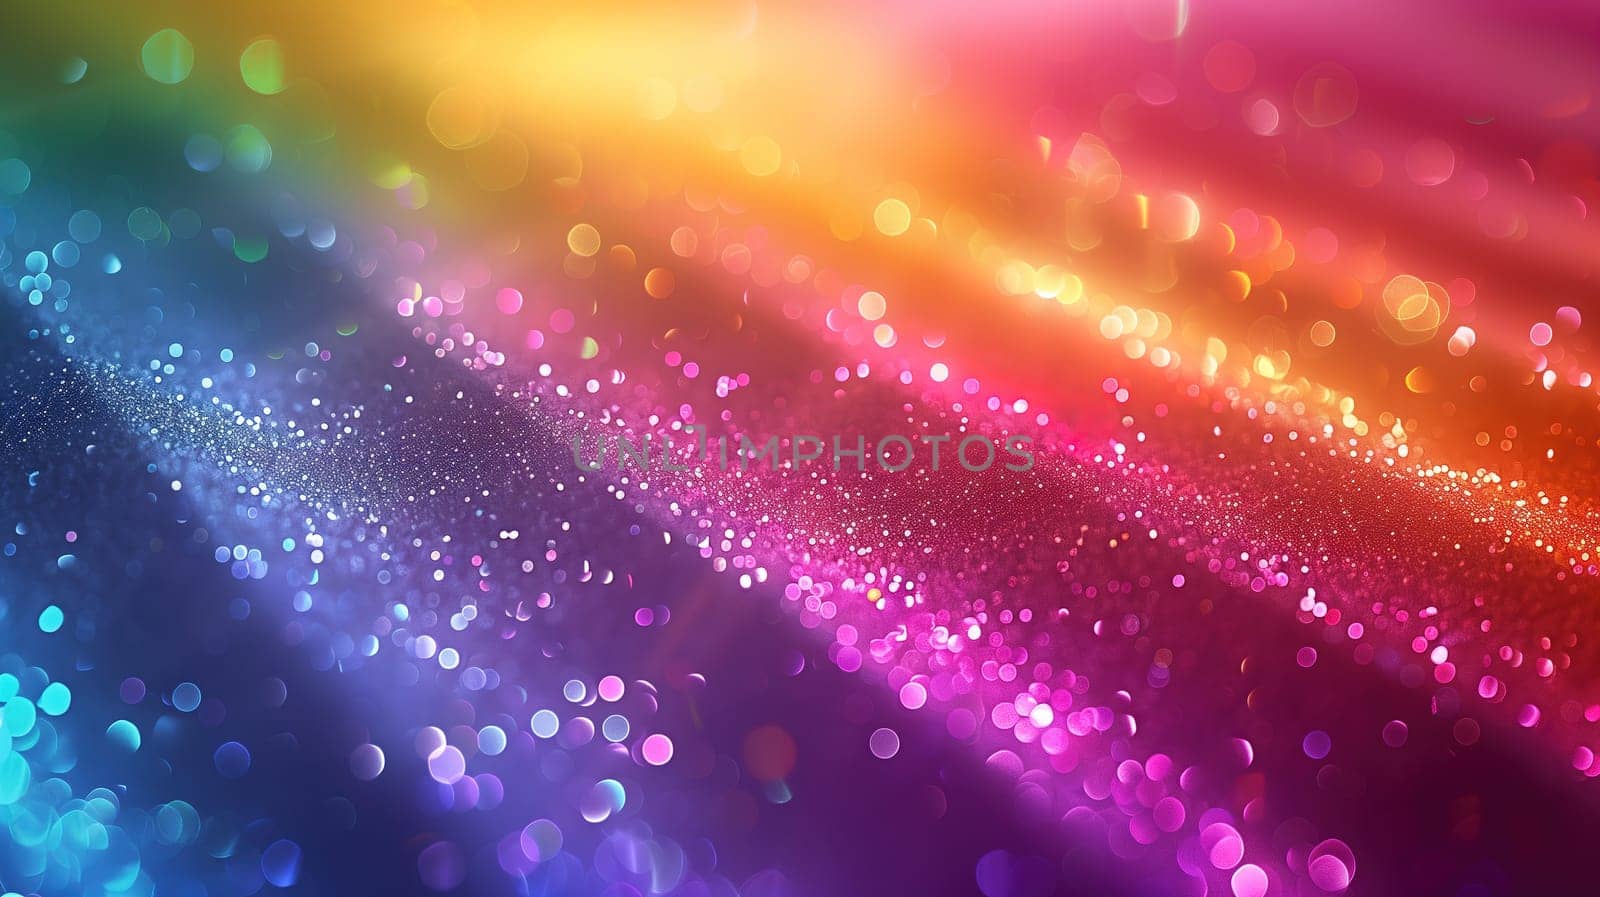 Rainbow Colored Background With Bubbles by TRMK